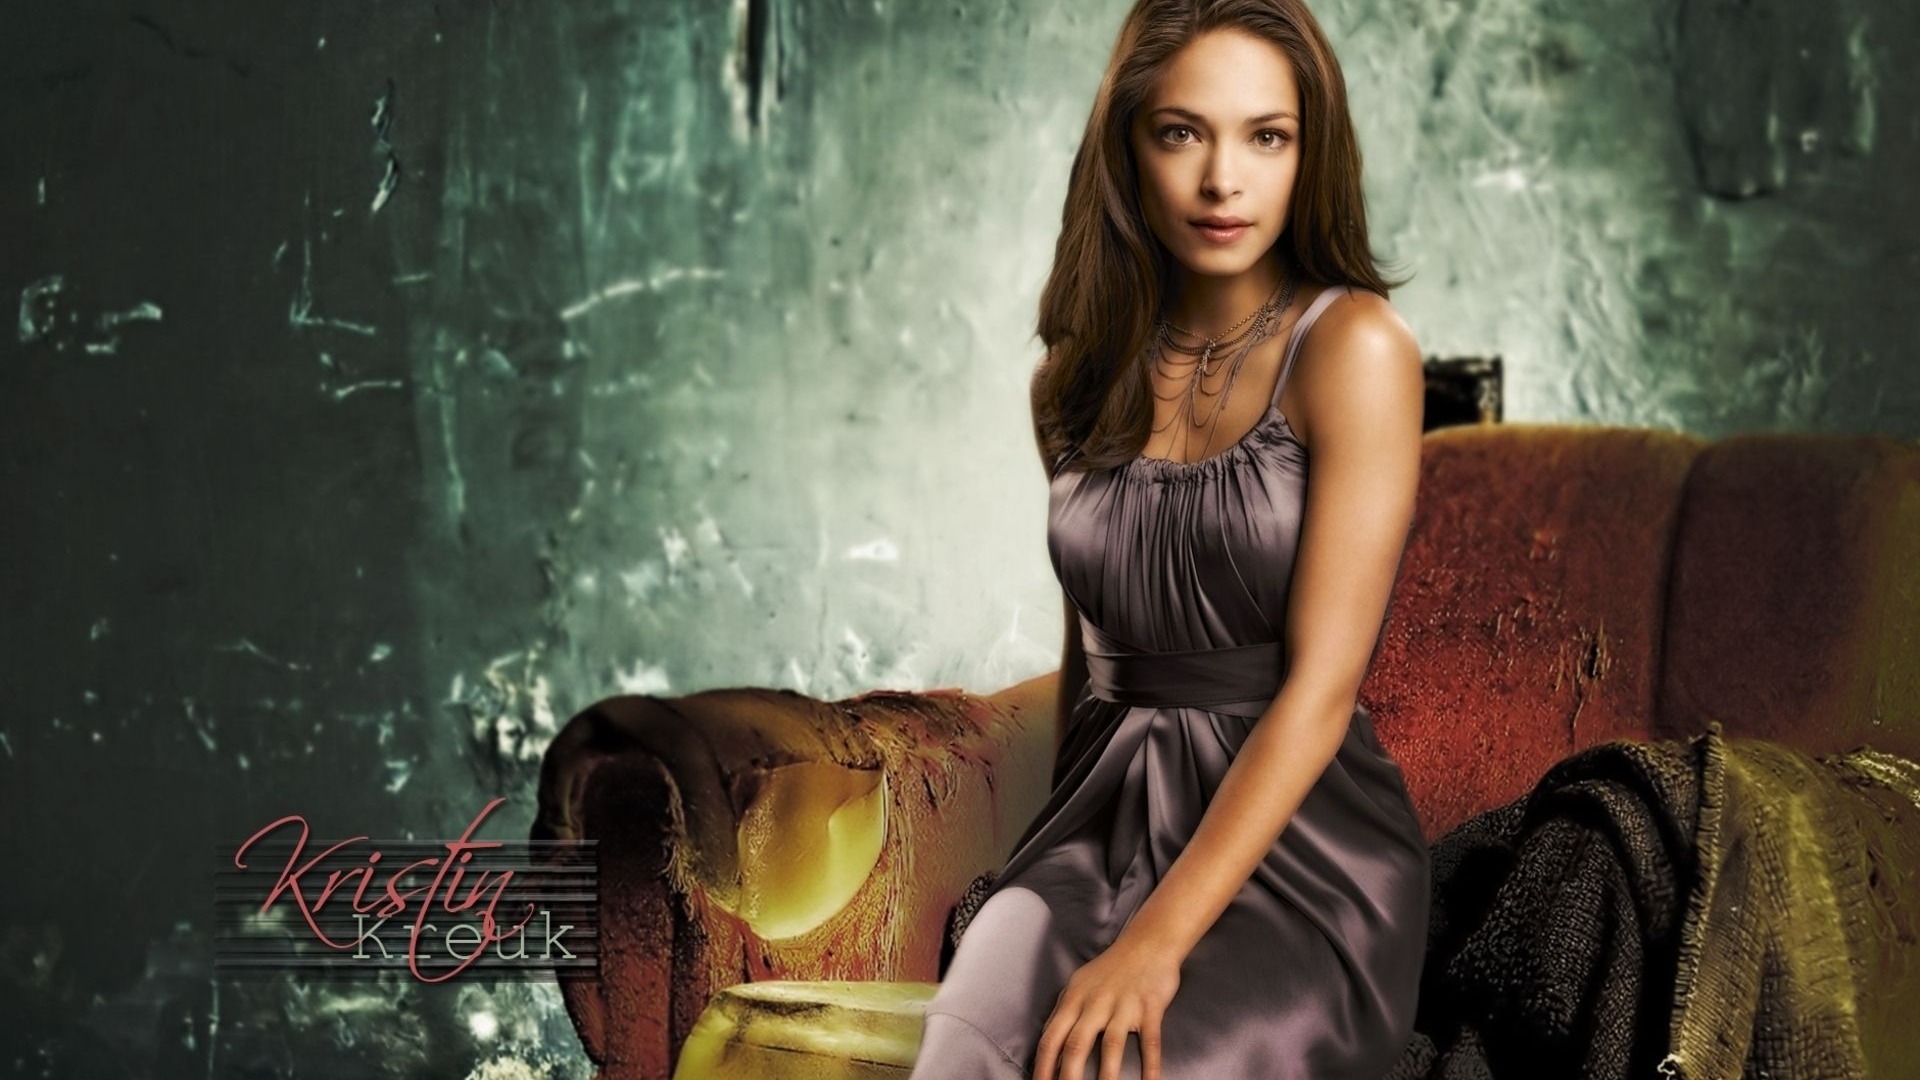 Kristin Kreuk #023 - 1920x1080 Wallpapers Pictures Photos Images